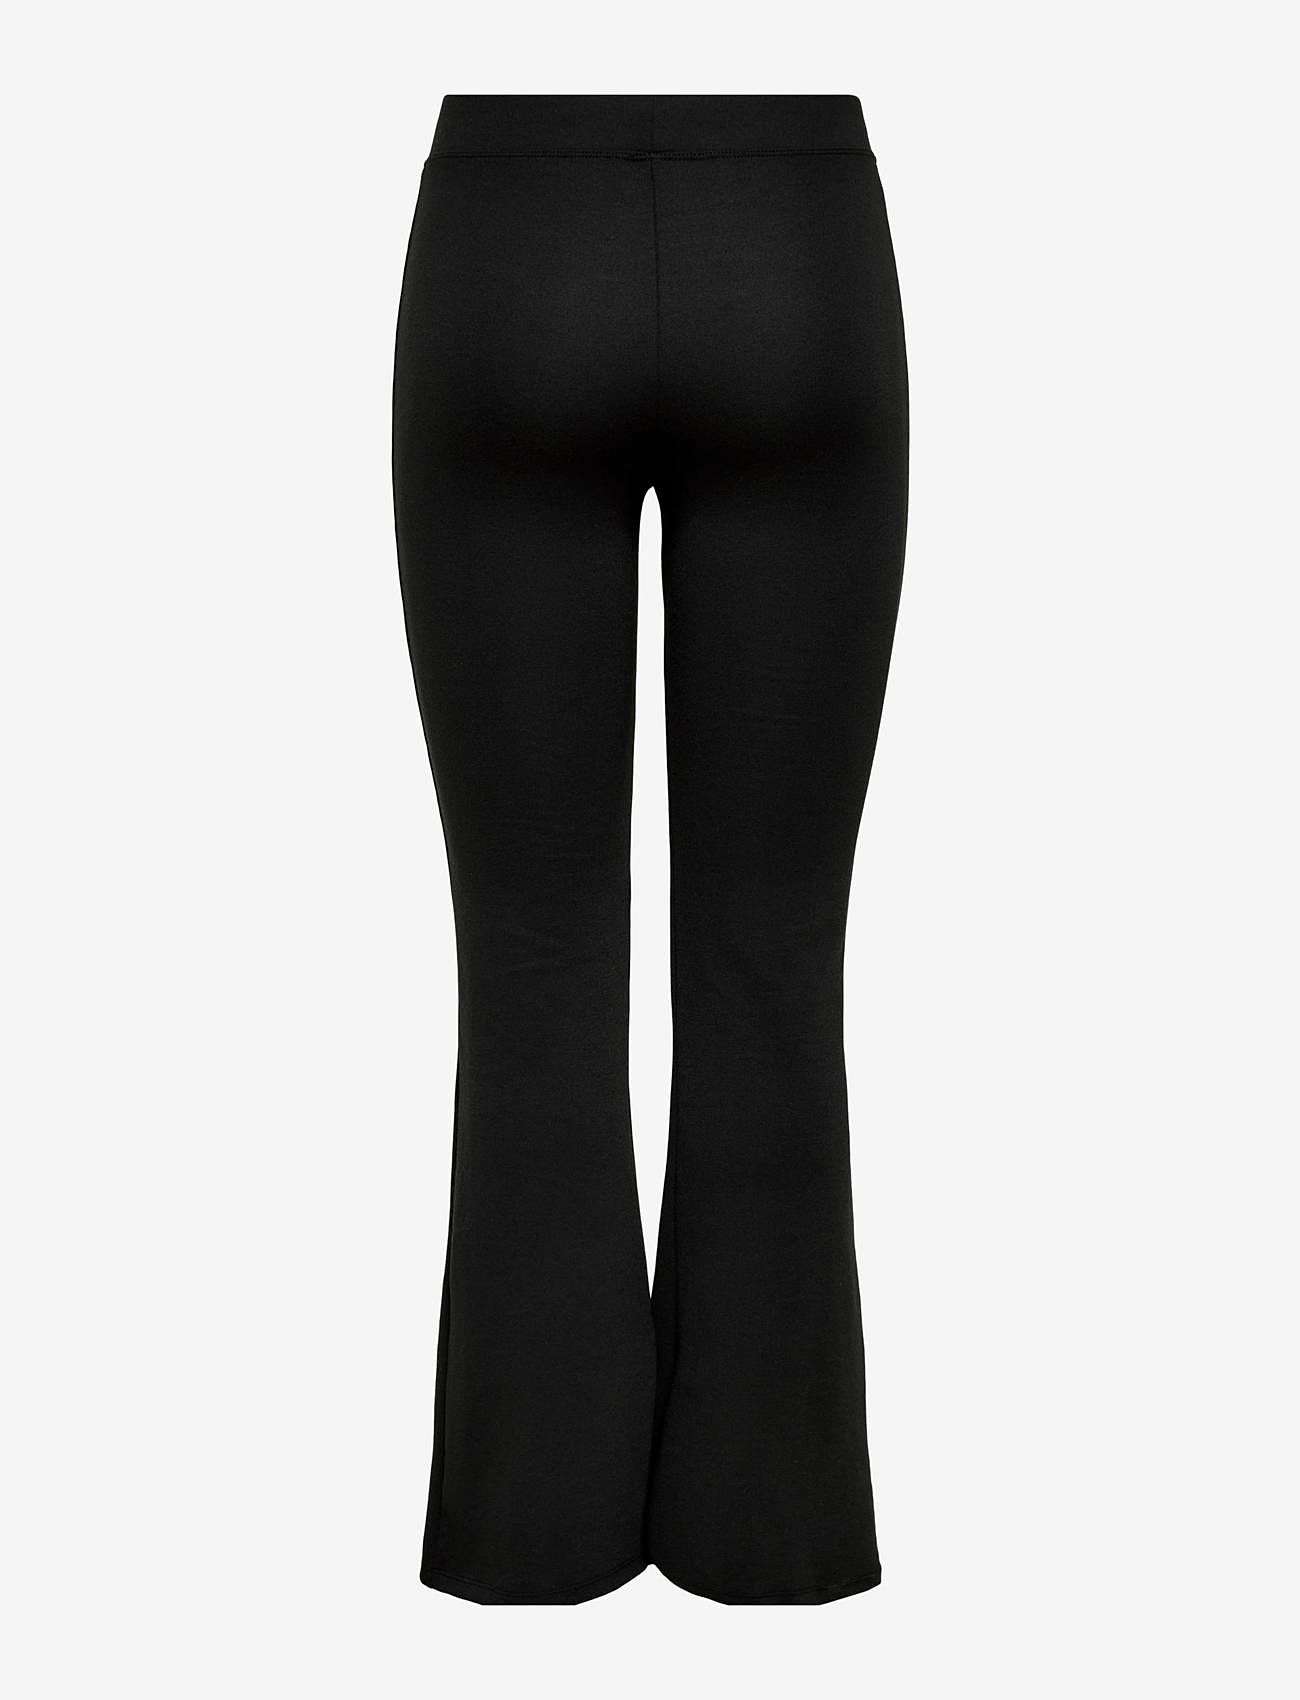 ONLY - ONLFEVER STRETCH FLAIRED PANTS JRS NOOS - alhaisimmat hinnat - black - 1